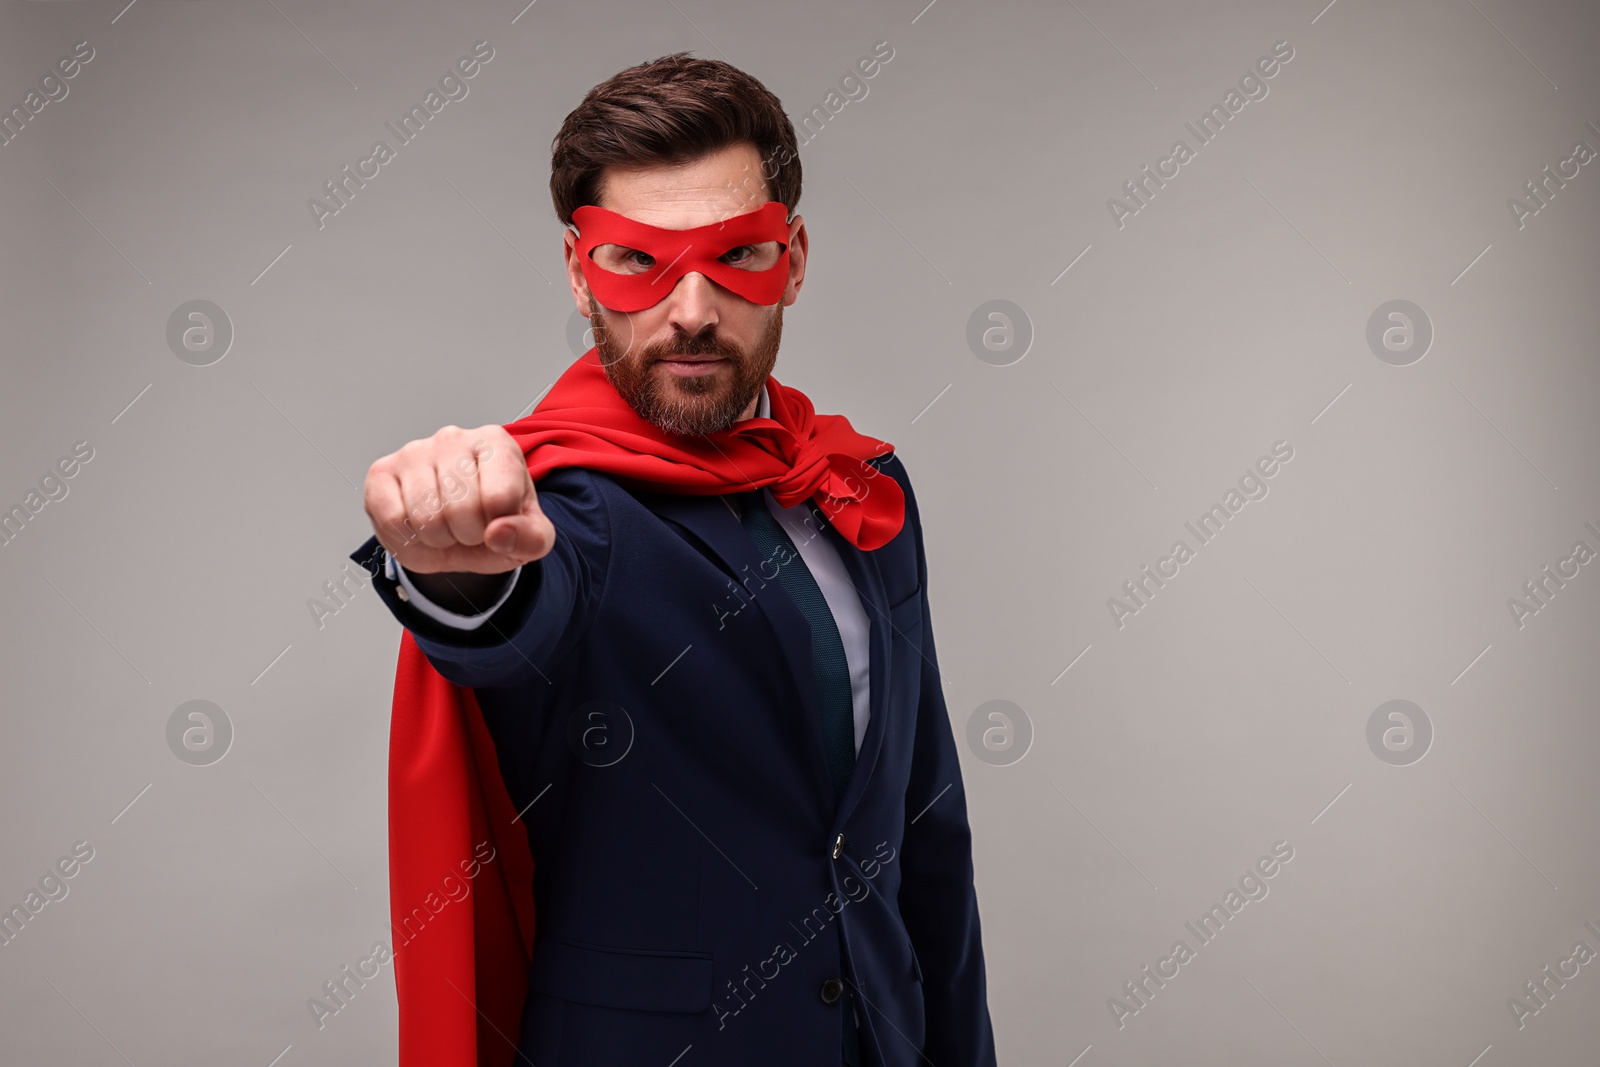 Photo of Confident businessman wearing red superhero cape and mask on beige background